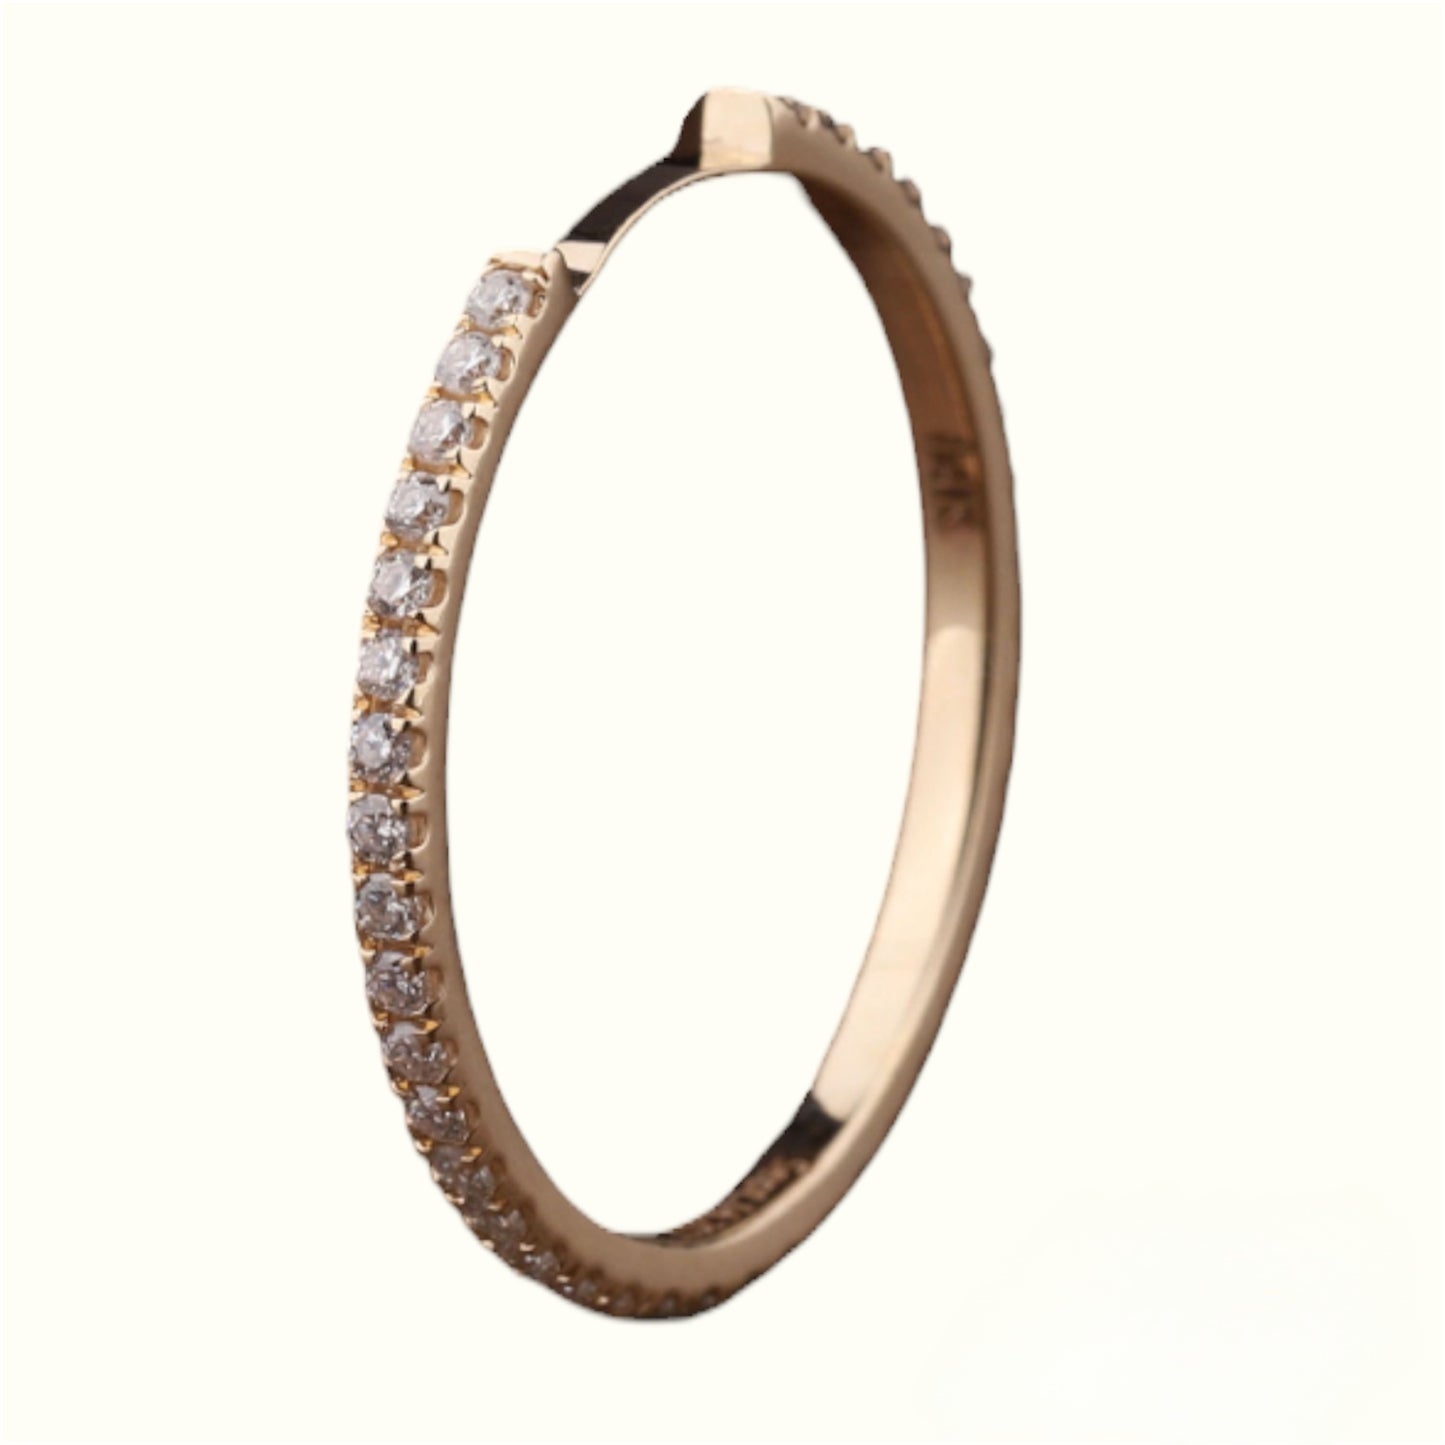 Reserved for Anna ONLY - 2mm 3/4 Eternity Milgrain Channel Pave Diamond Band with a Space Bar